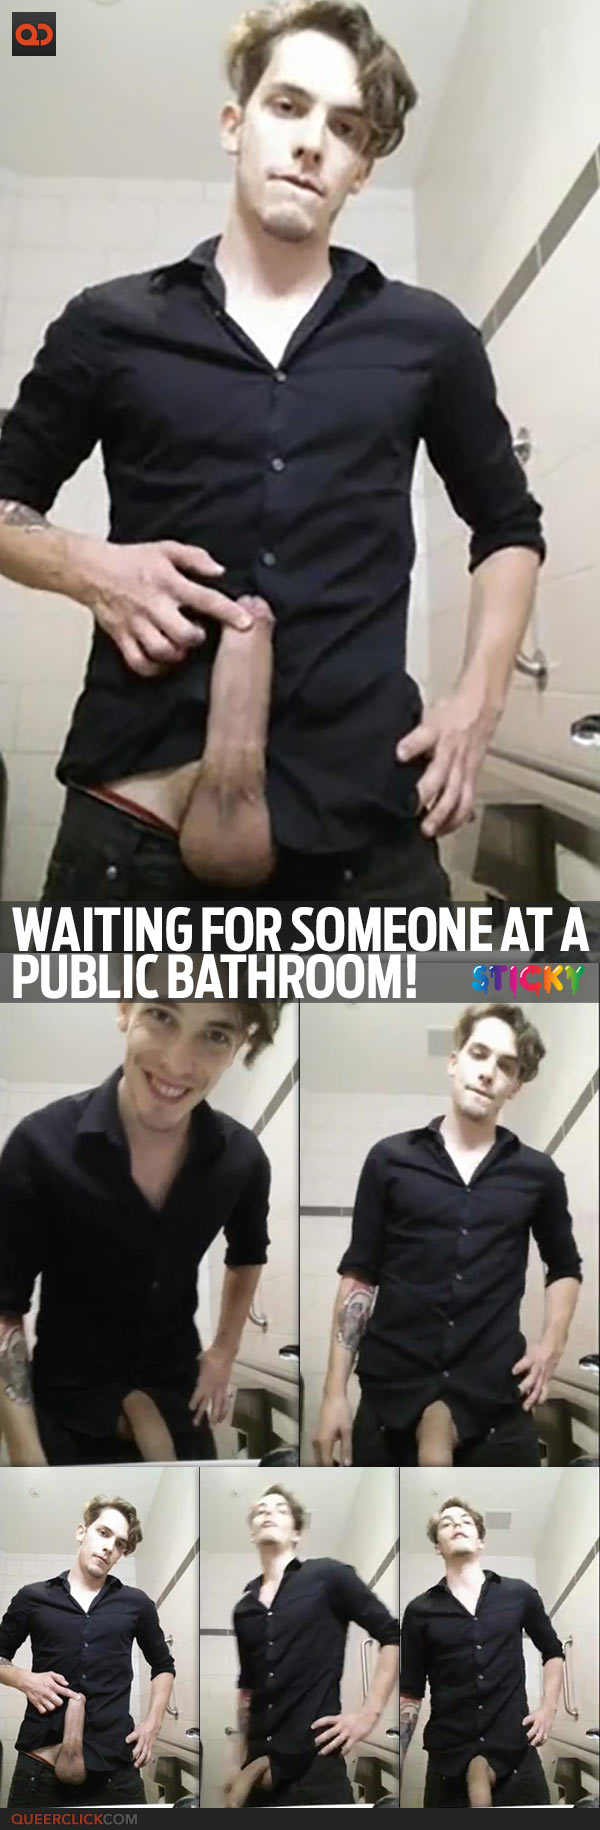 Waiting For Someone At A Public Bathroom!